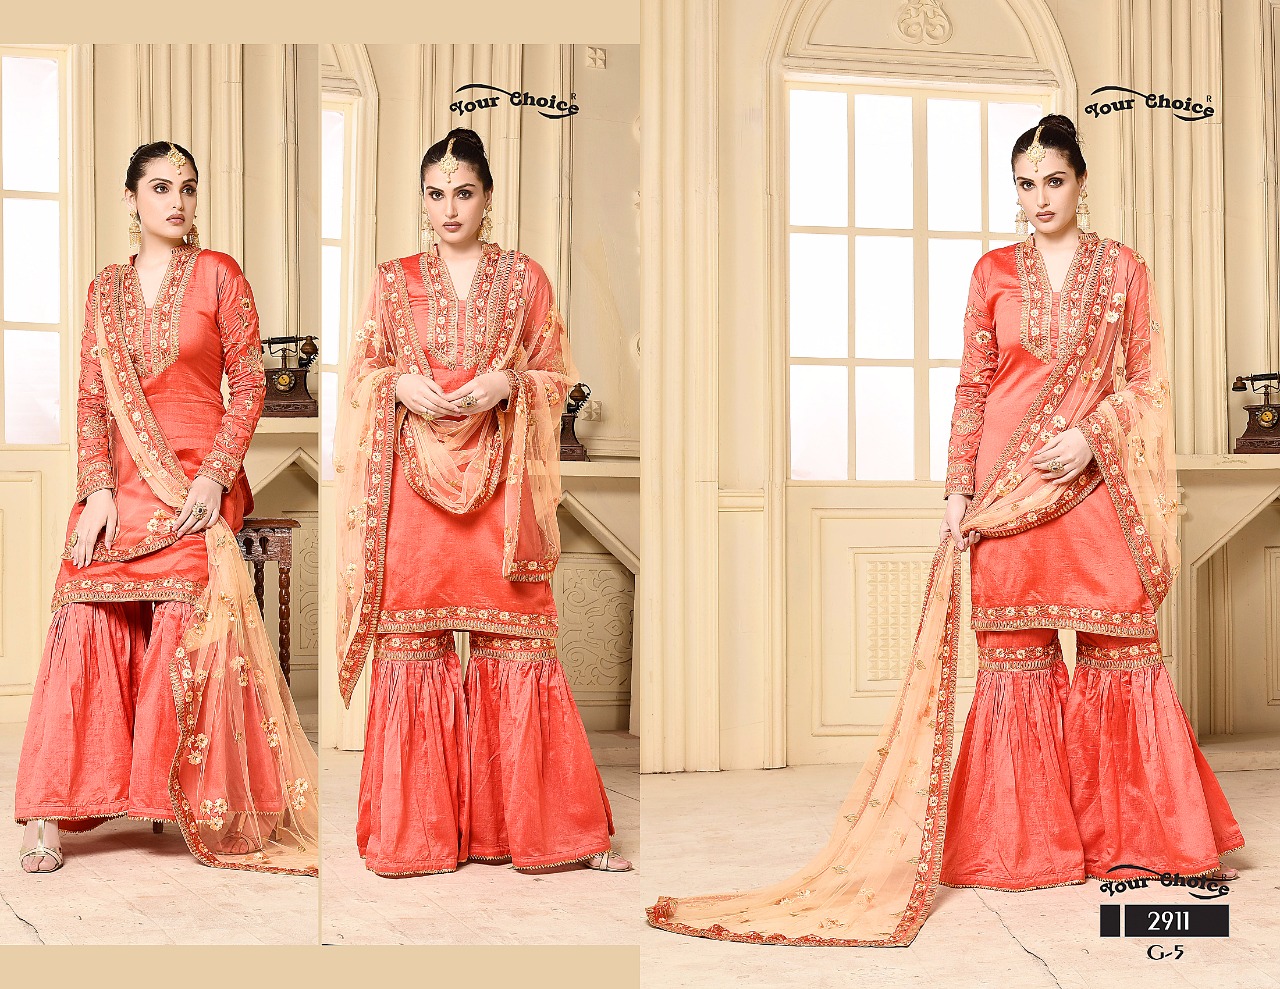 Your choice presents g 5 stylish with Different patterns salwar kameez concept